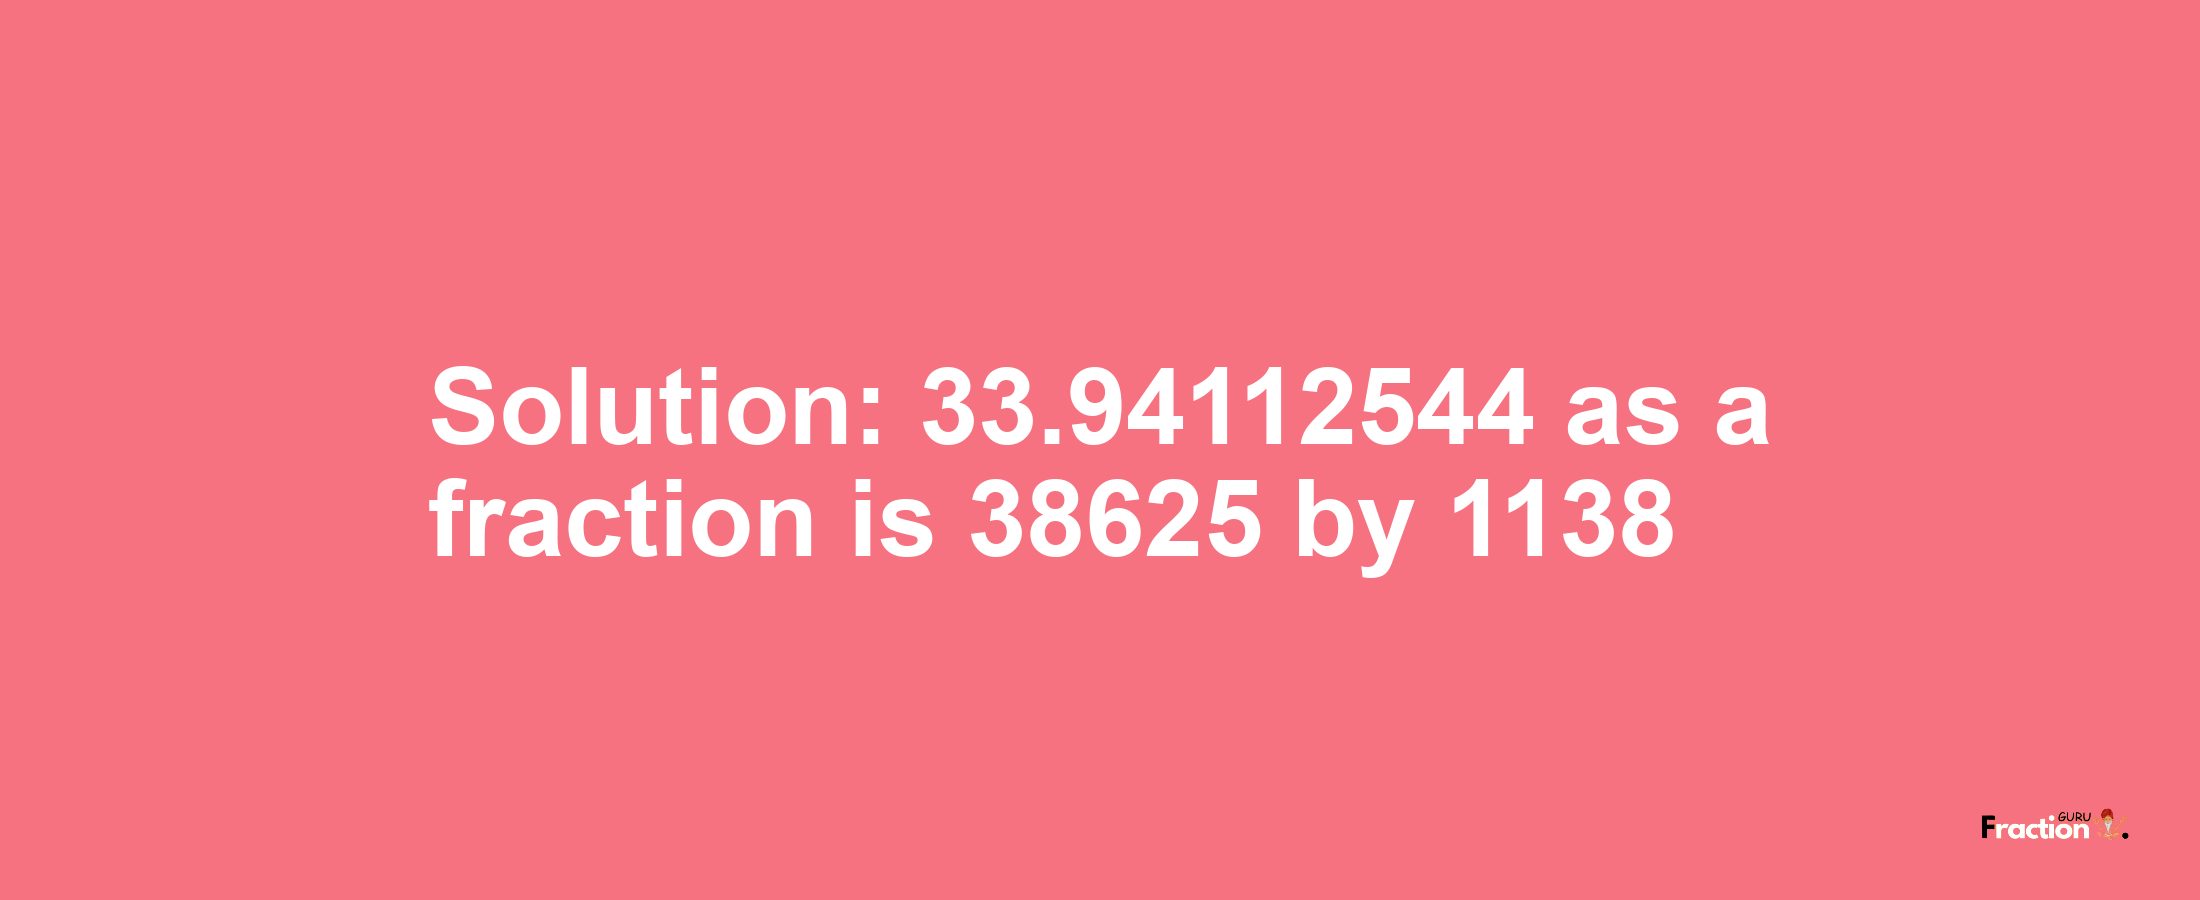 Solution:33.94112544 as a fraction is 38625/1138